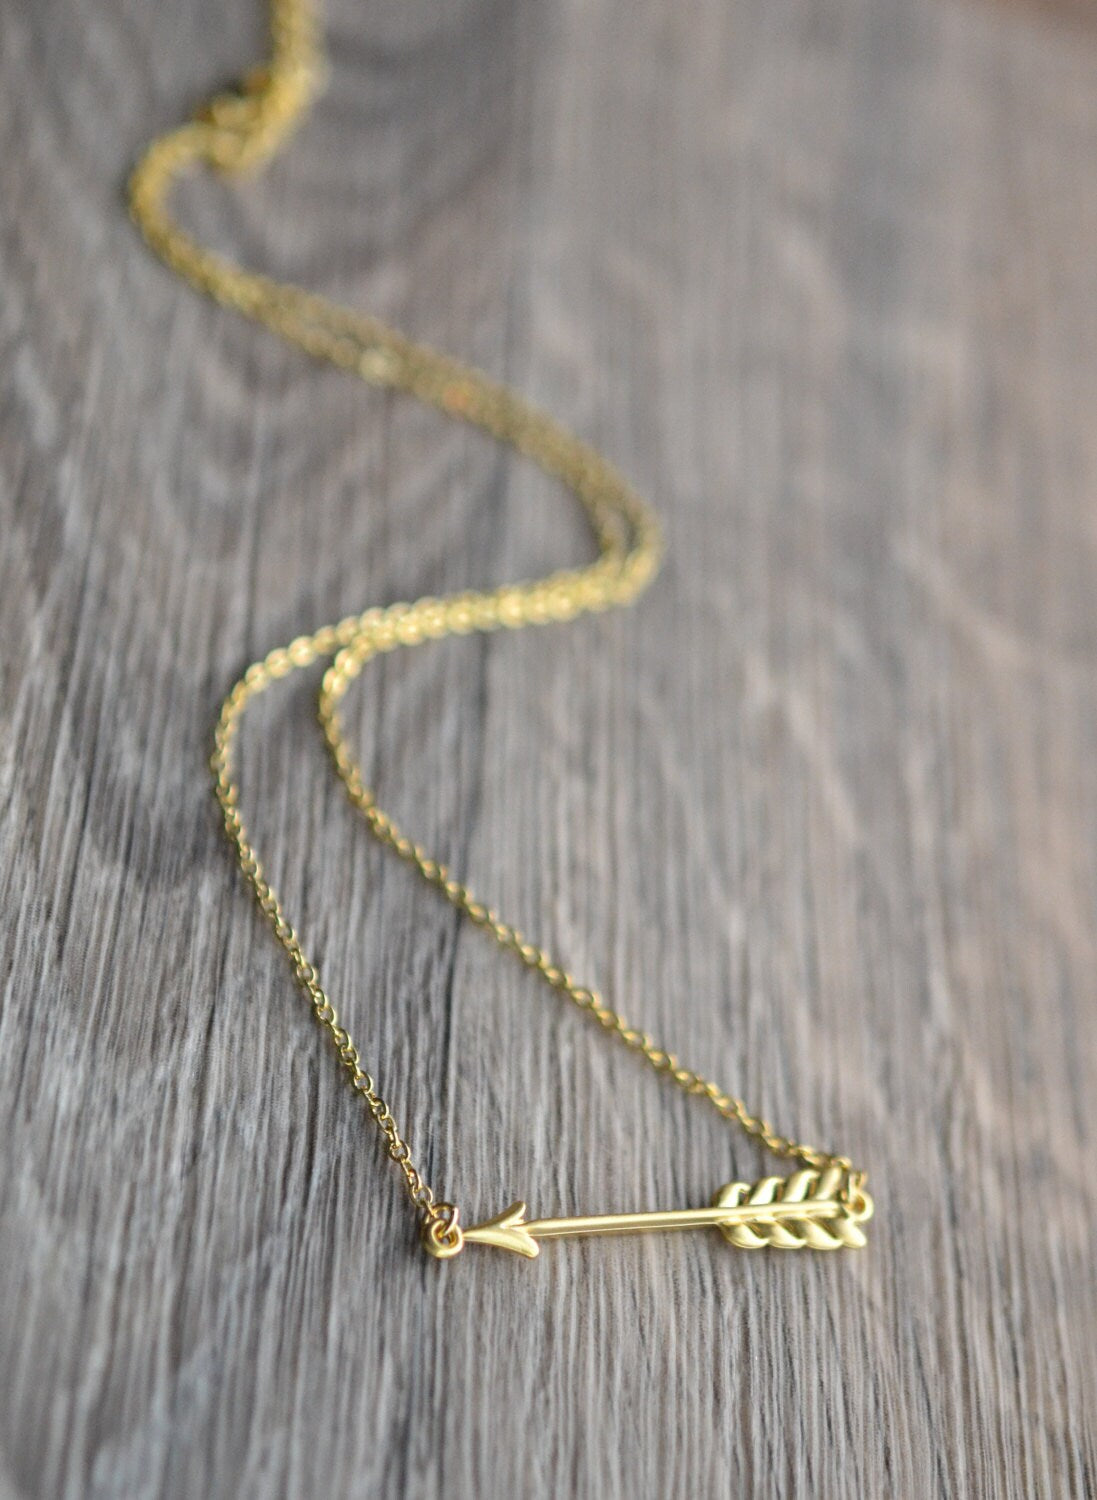 Gold Arrow Necklace // Cupid's Arrow Necklace // Small Arrow Necklace // Gift for Her // Bridesmaid Gift // Best Friend Gift